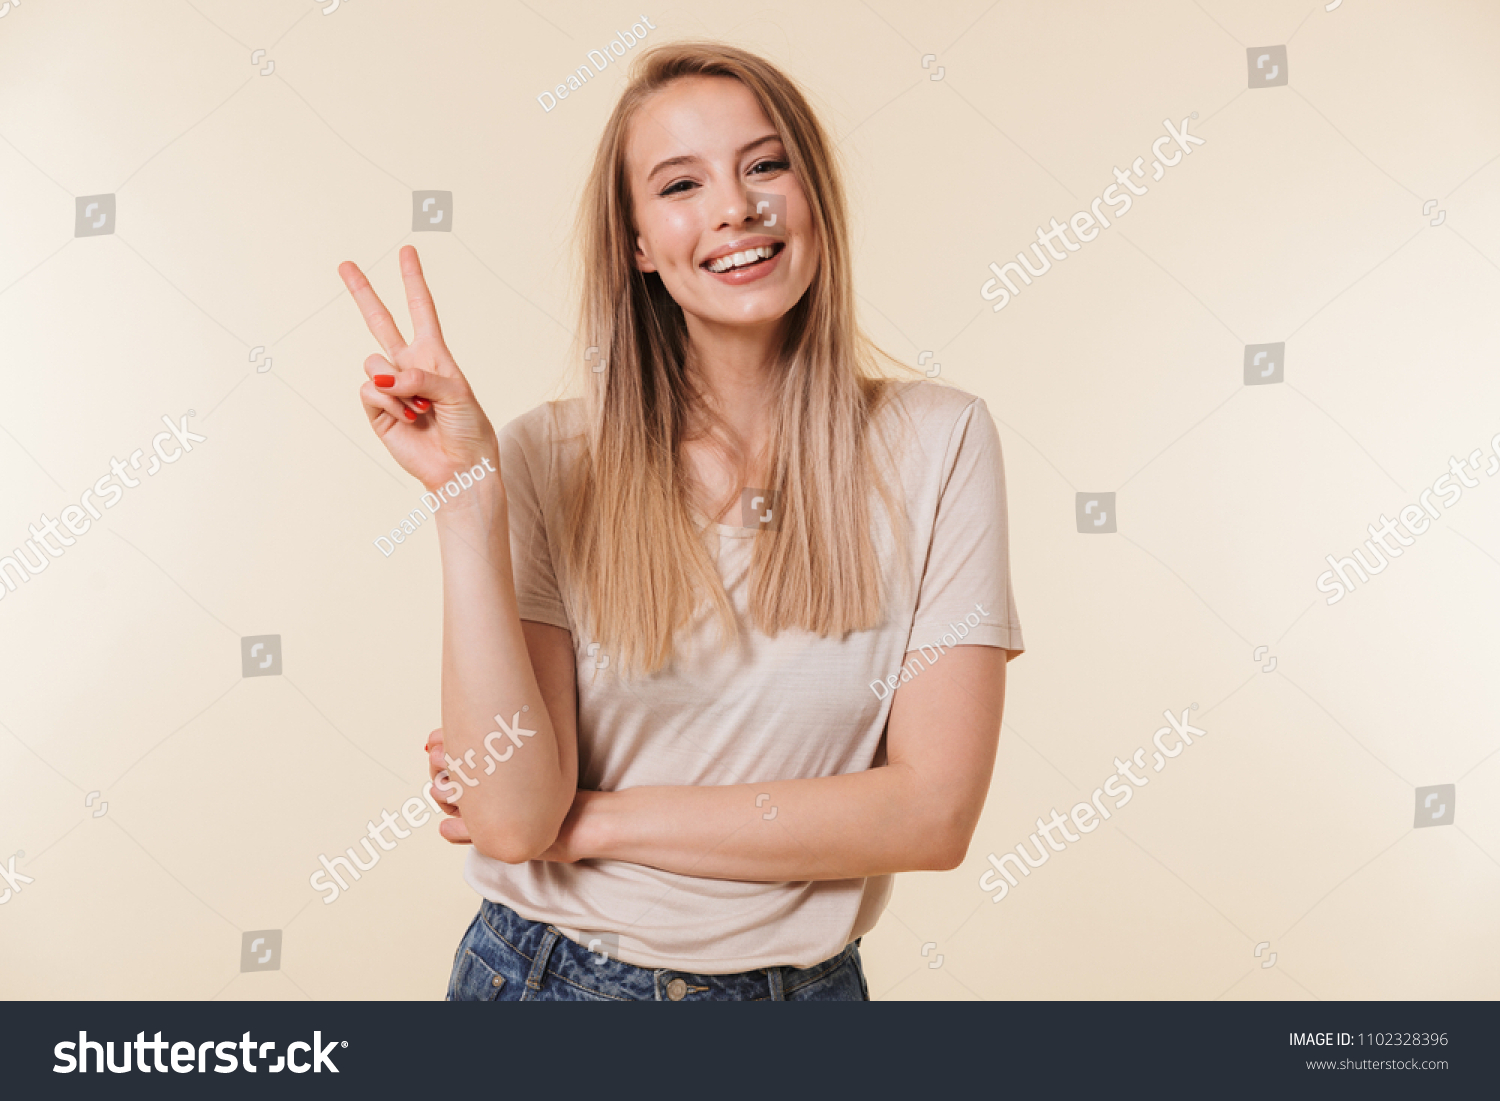 Image of cheerful caucasian woman wearing casual clothing smiling and showing peace sign with two fingers isolated over beige background in studio #1102328396